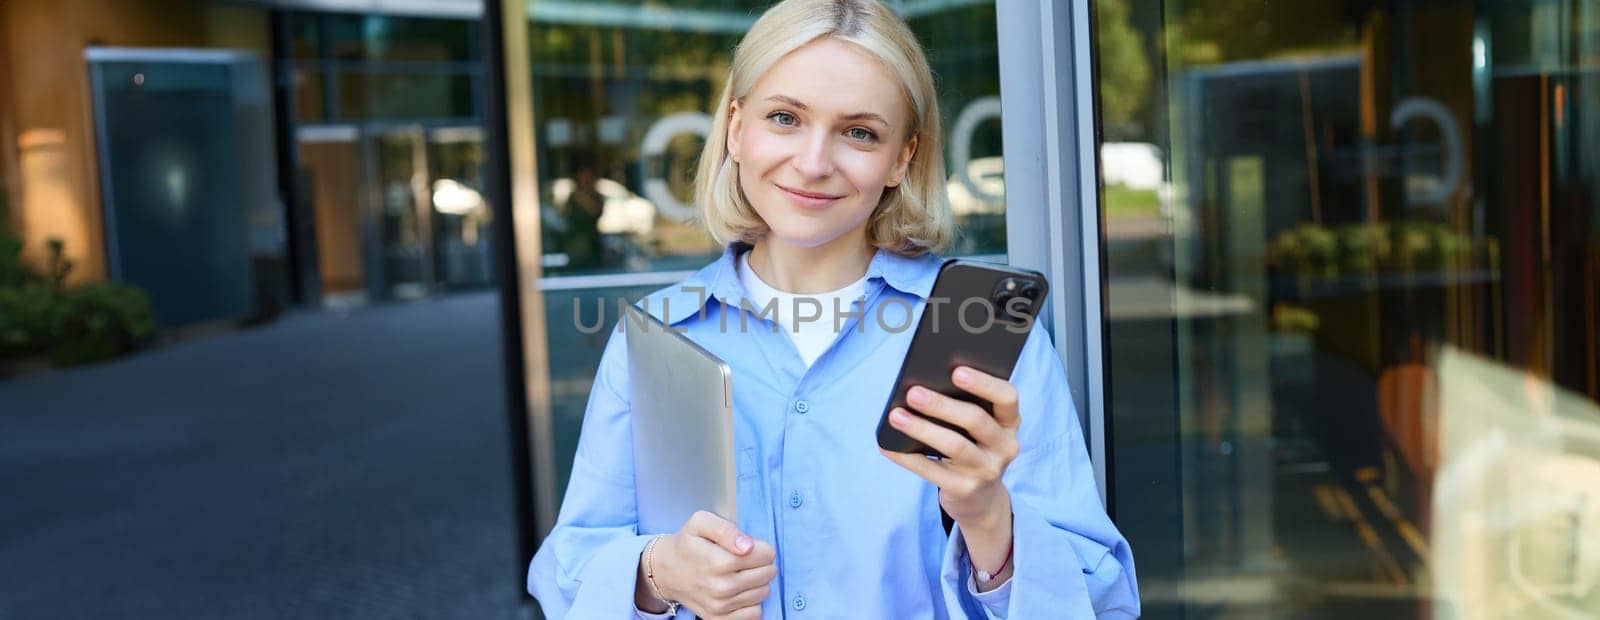 Lifestyle shot of young smiling woman, student or employee near office building, holding mobile phone and laptop in hands, looking happy, checking notification on smartphone.